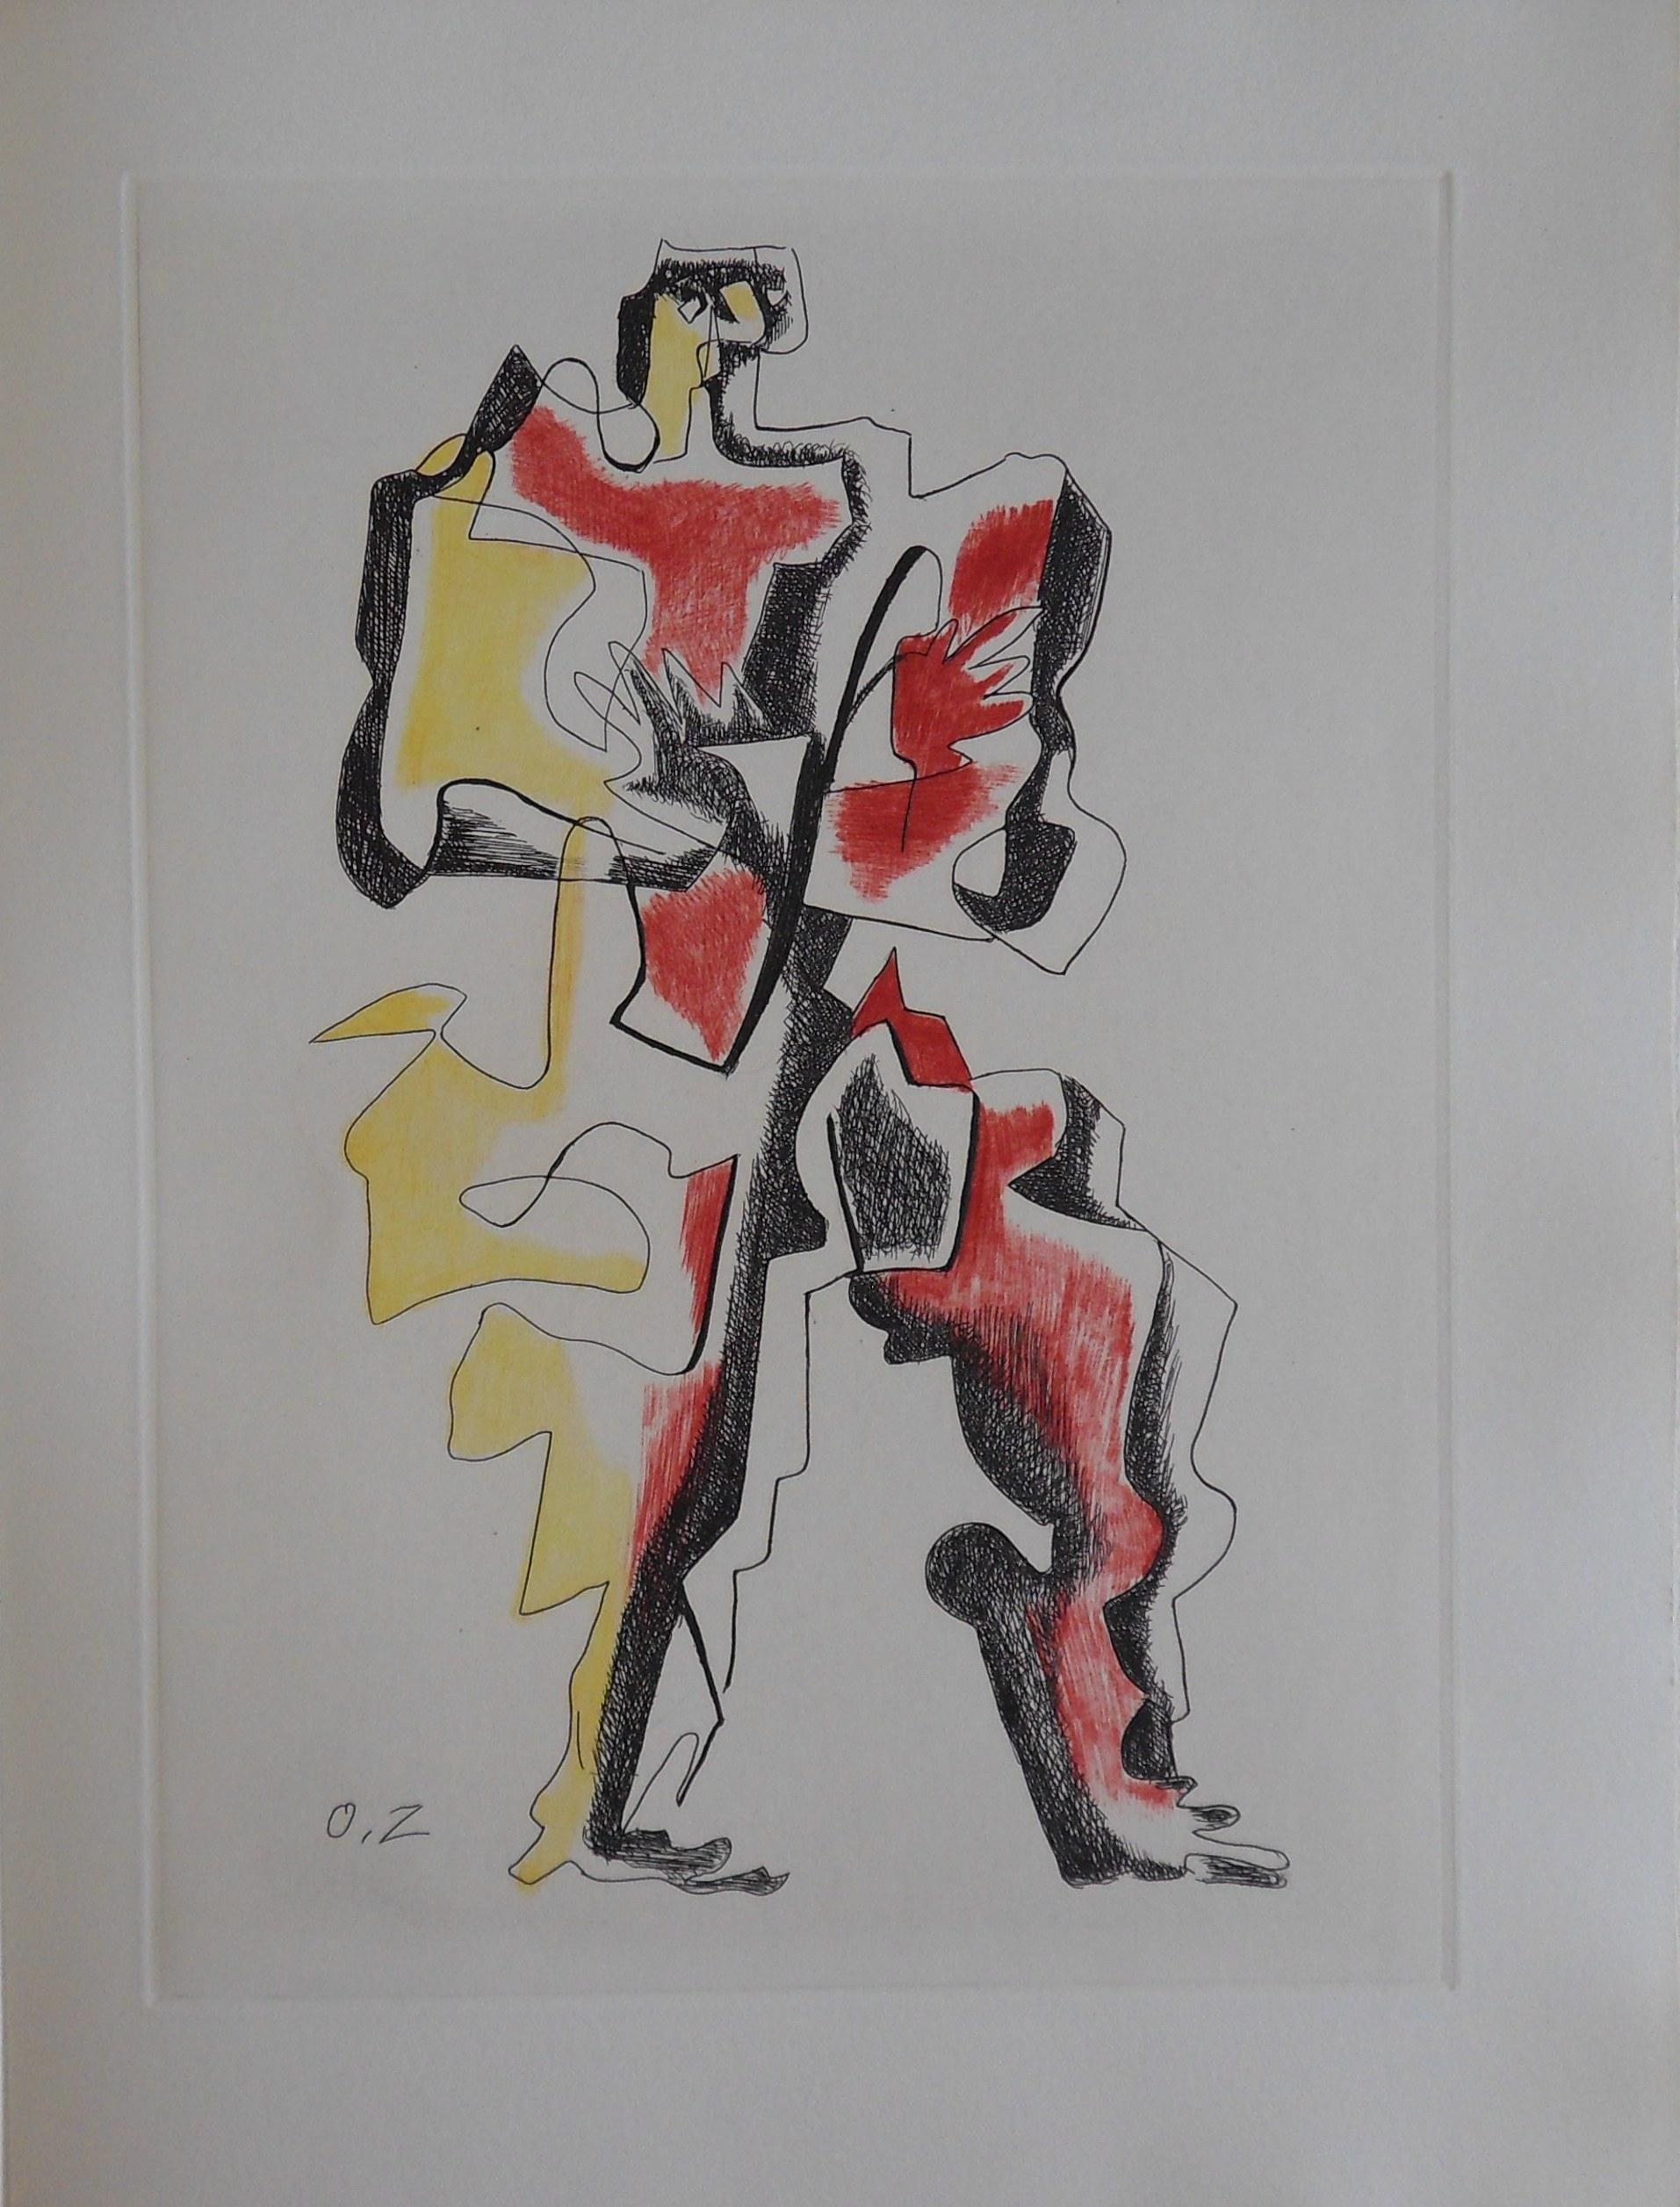 Ossip Zadkine Figurative Print - Man in Yellow and Red - Surrealist Original Etching